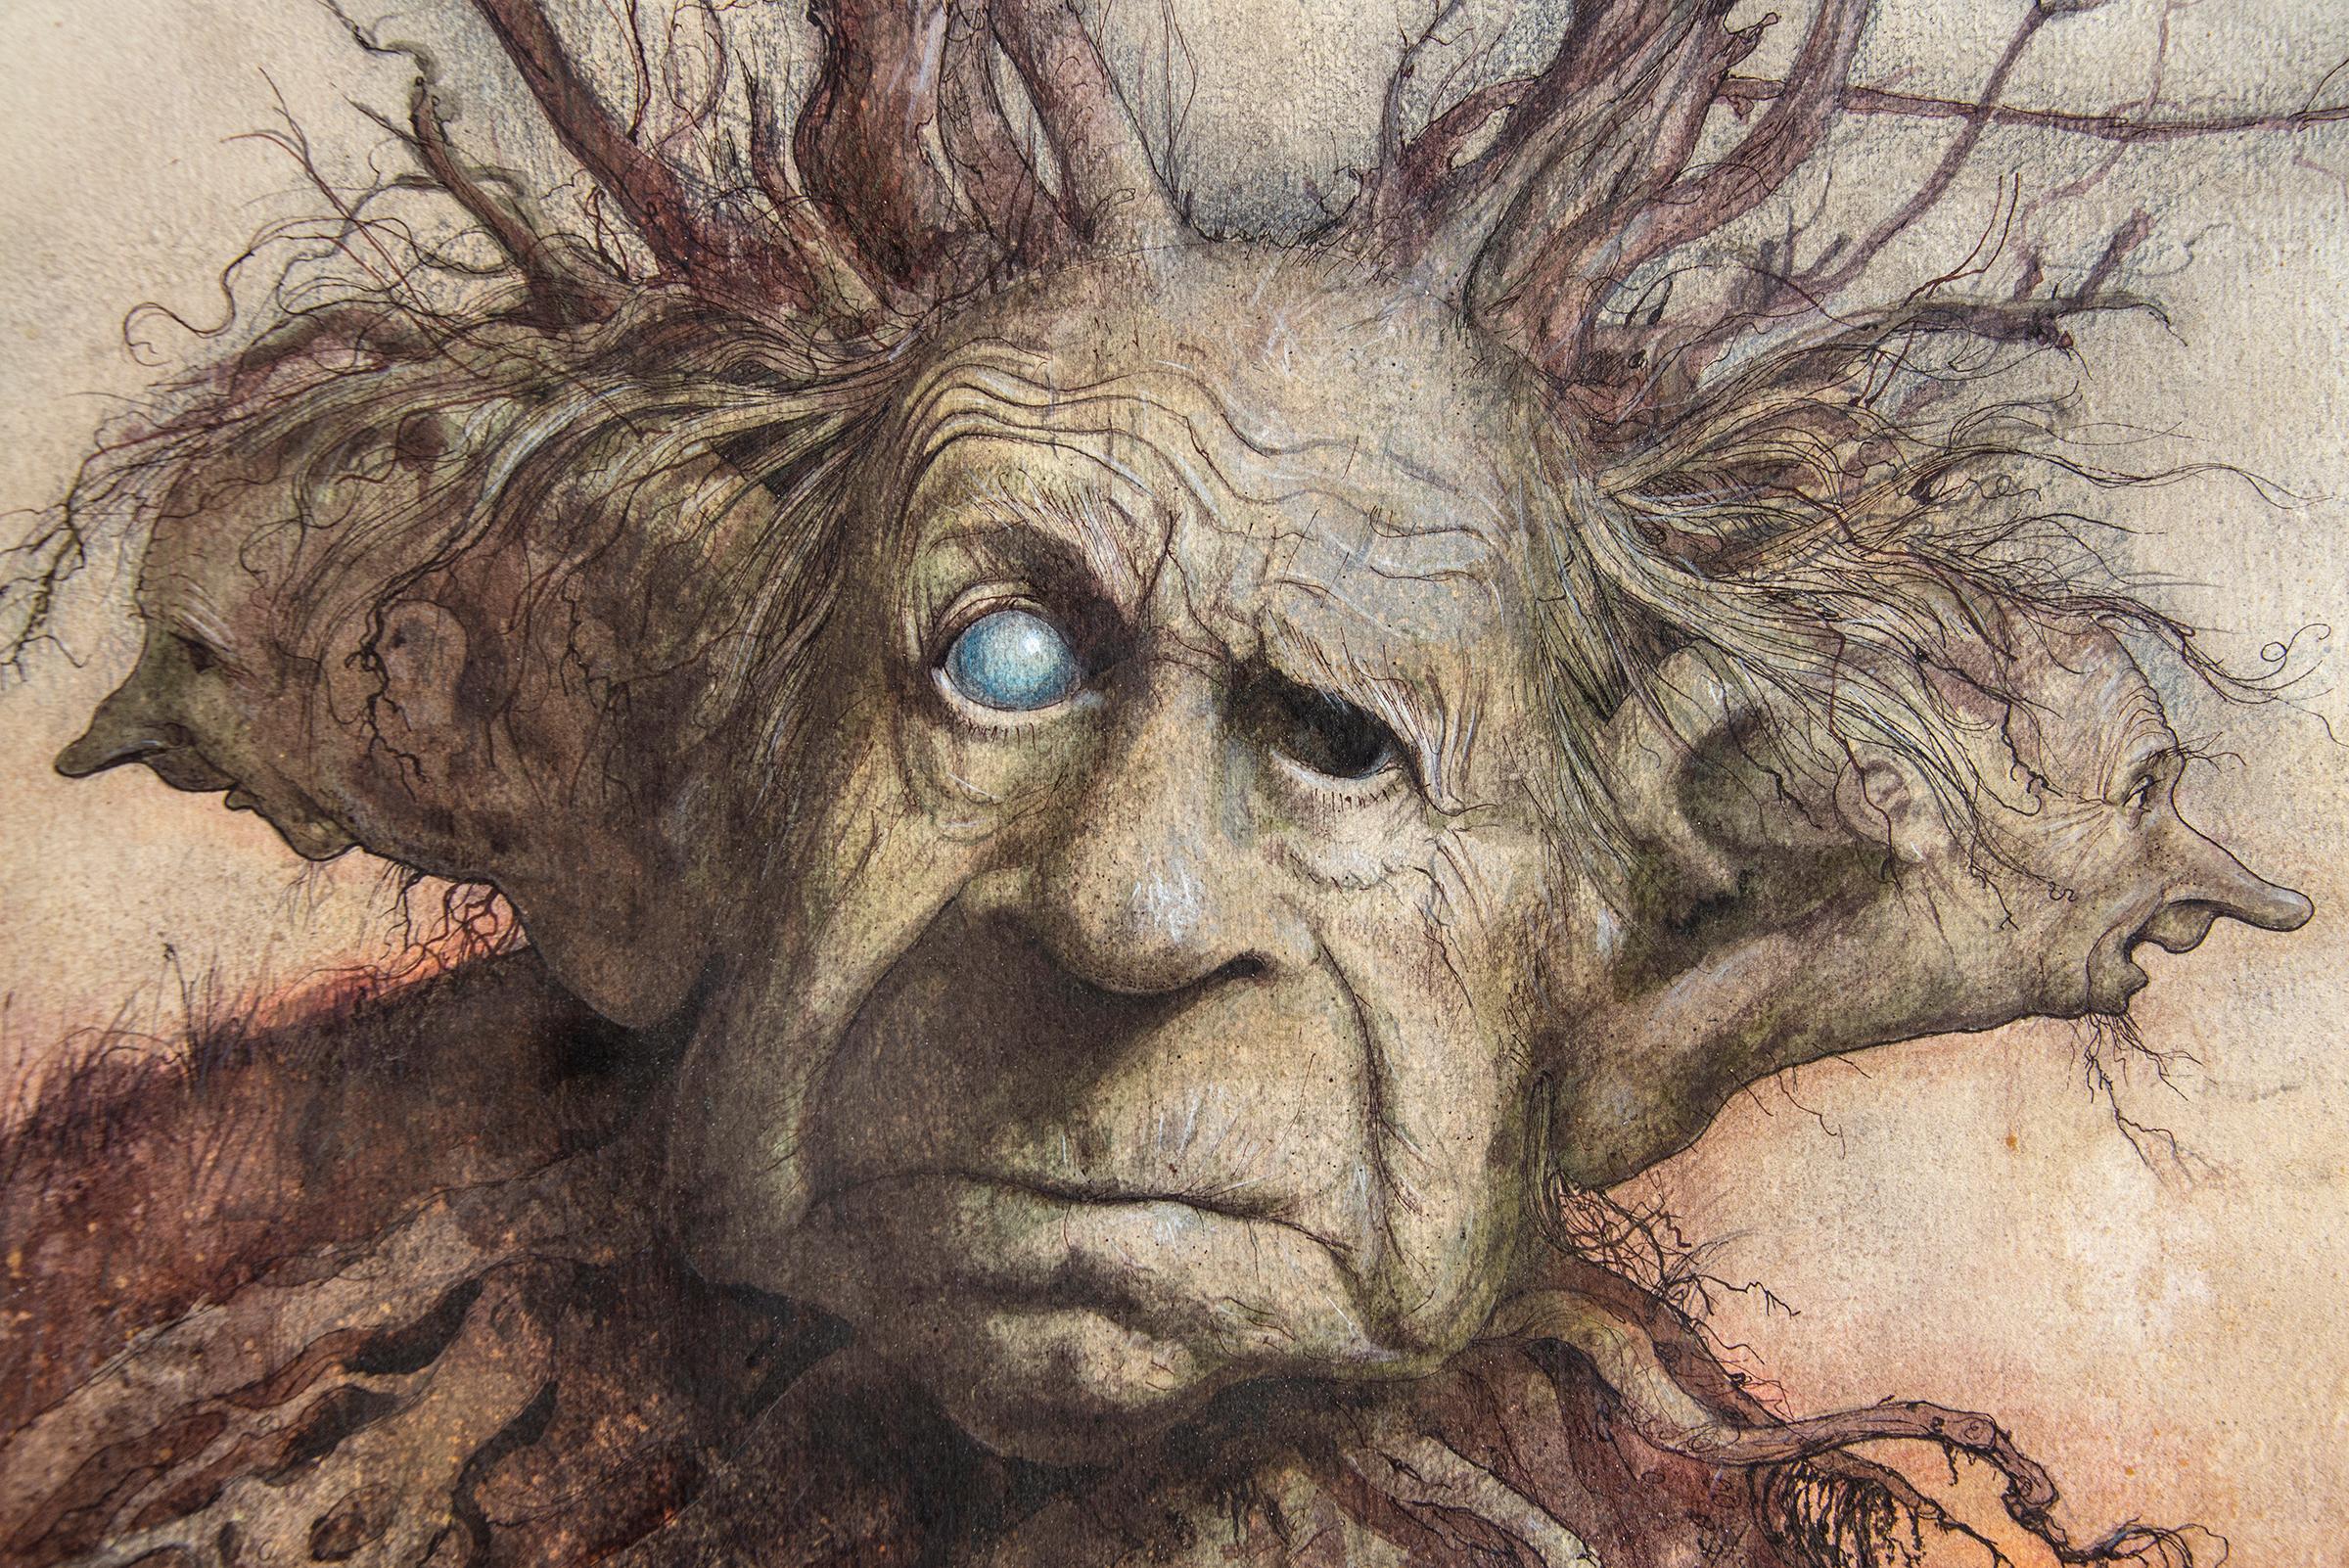 Three Headed Man Fantasy illustration - Sioux  Legend reference - Art by Brian Froud